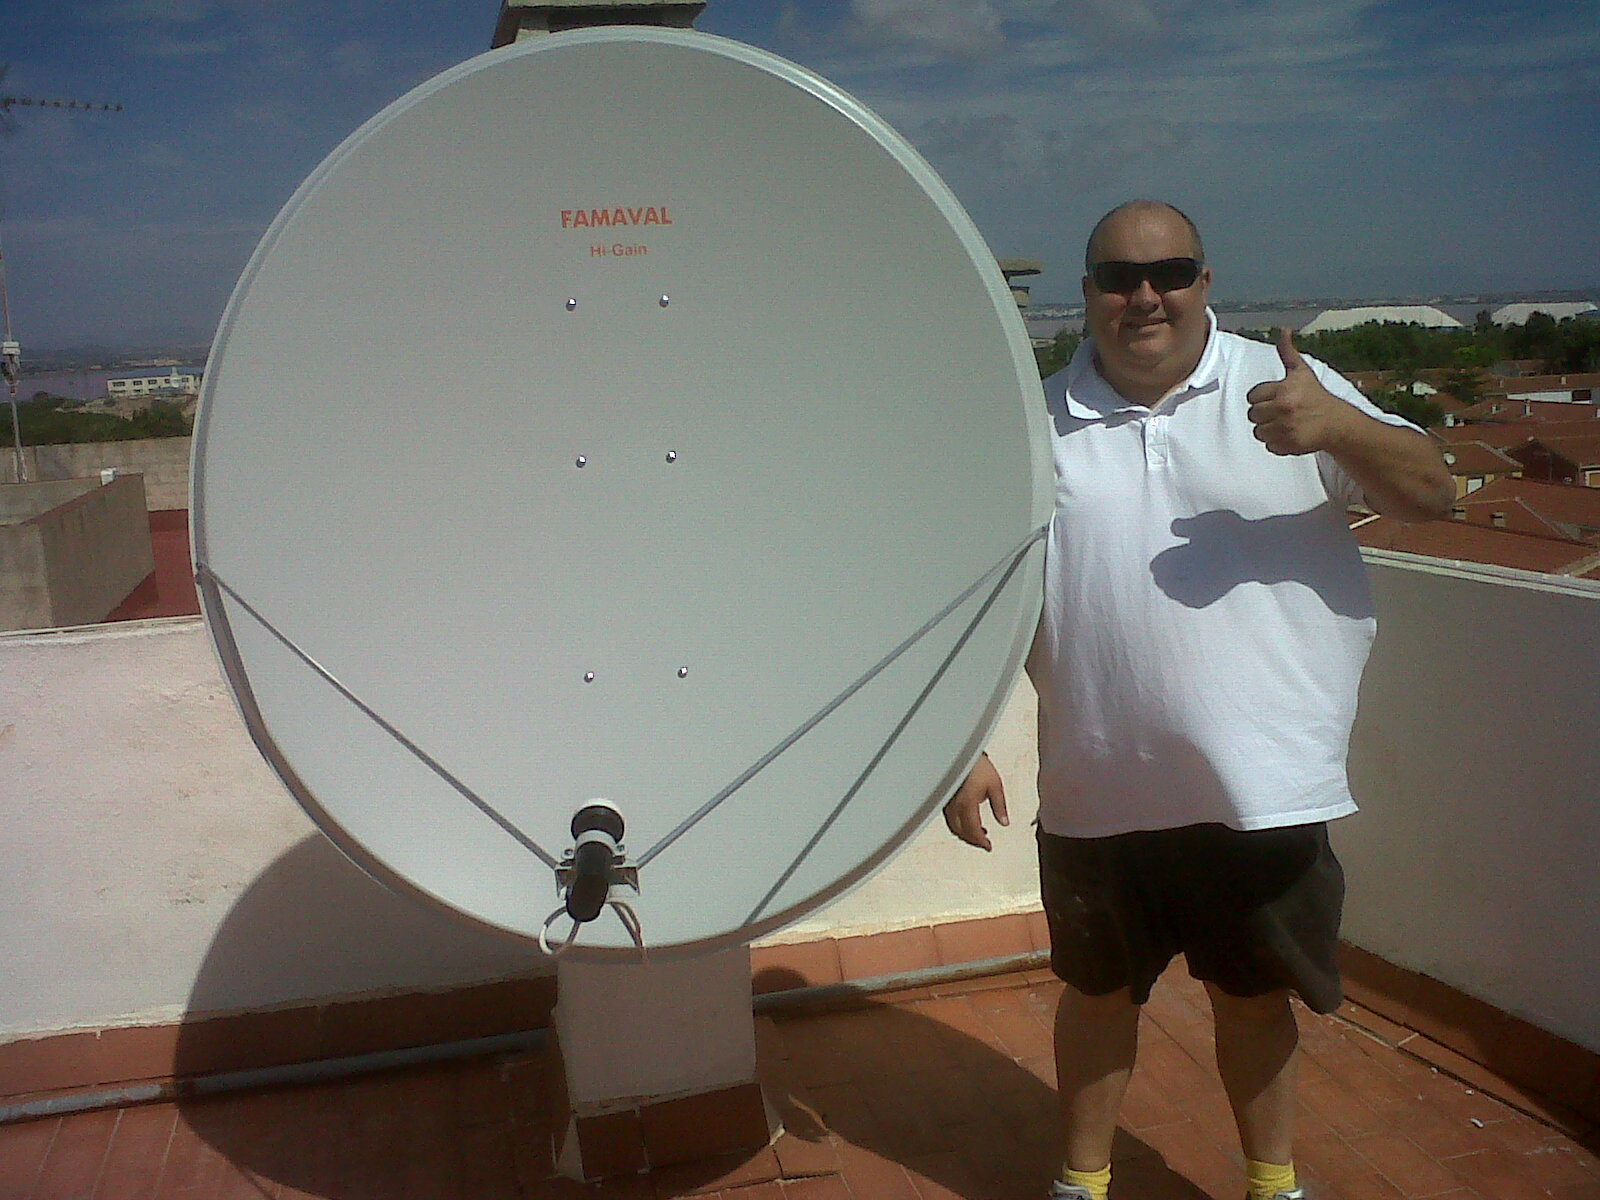 quesada satellite tv 1.4 famaval dish special offer HD Box Torrevieja Spain offer MAY